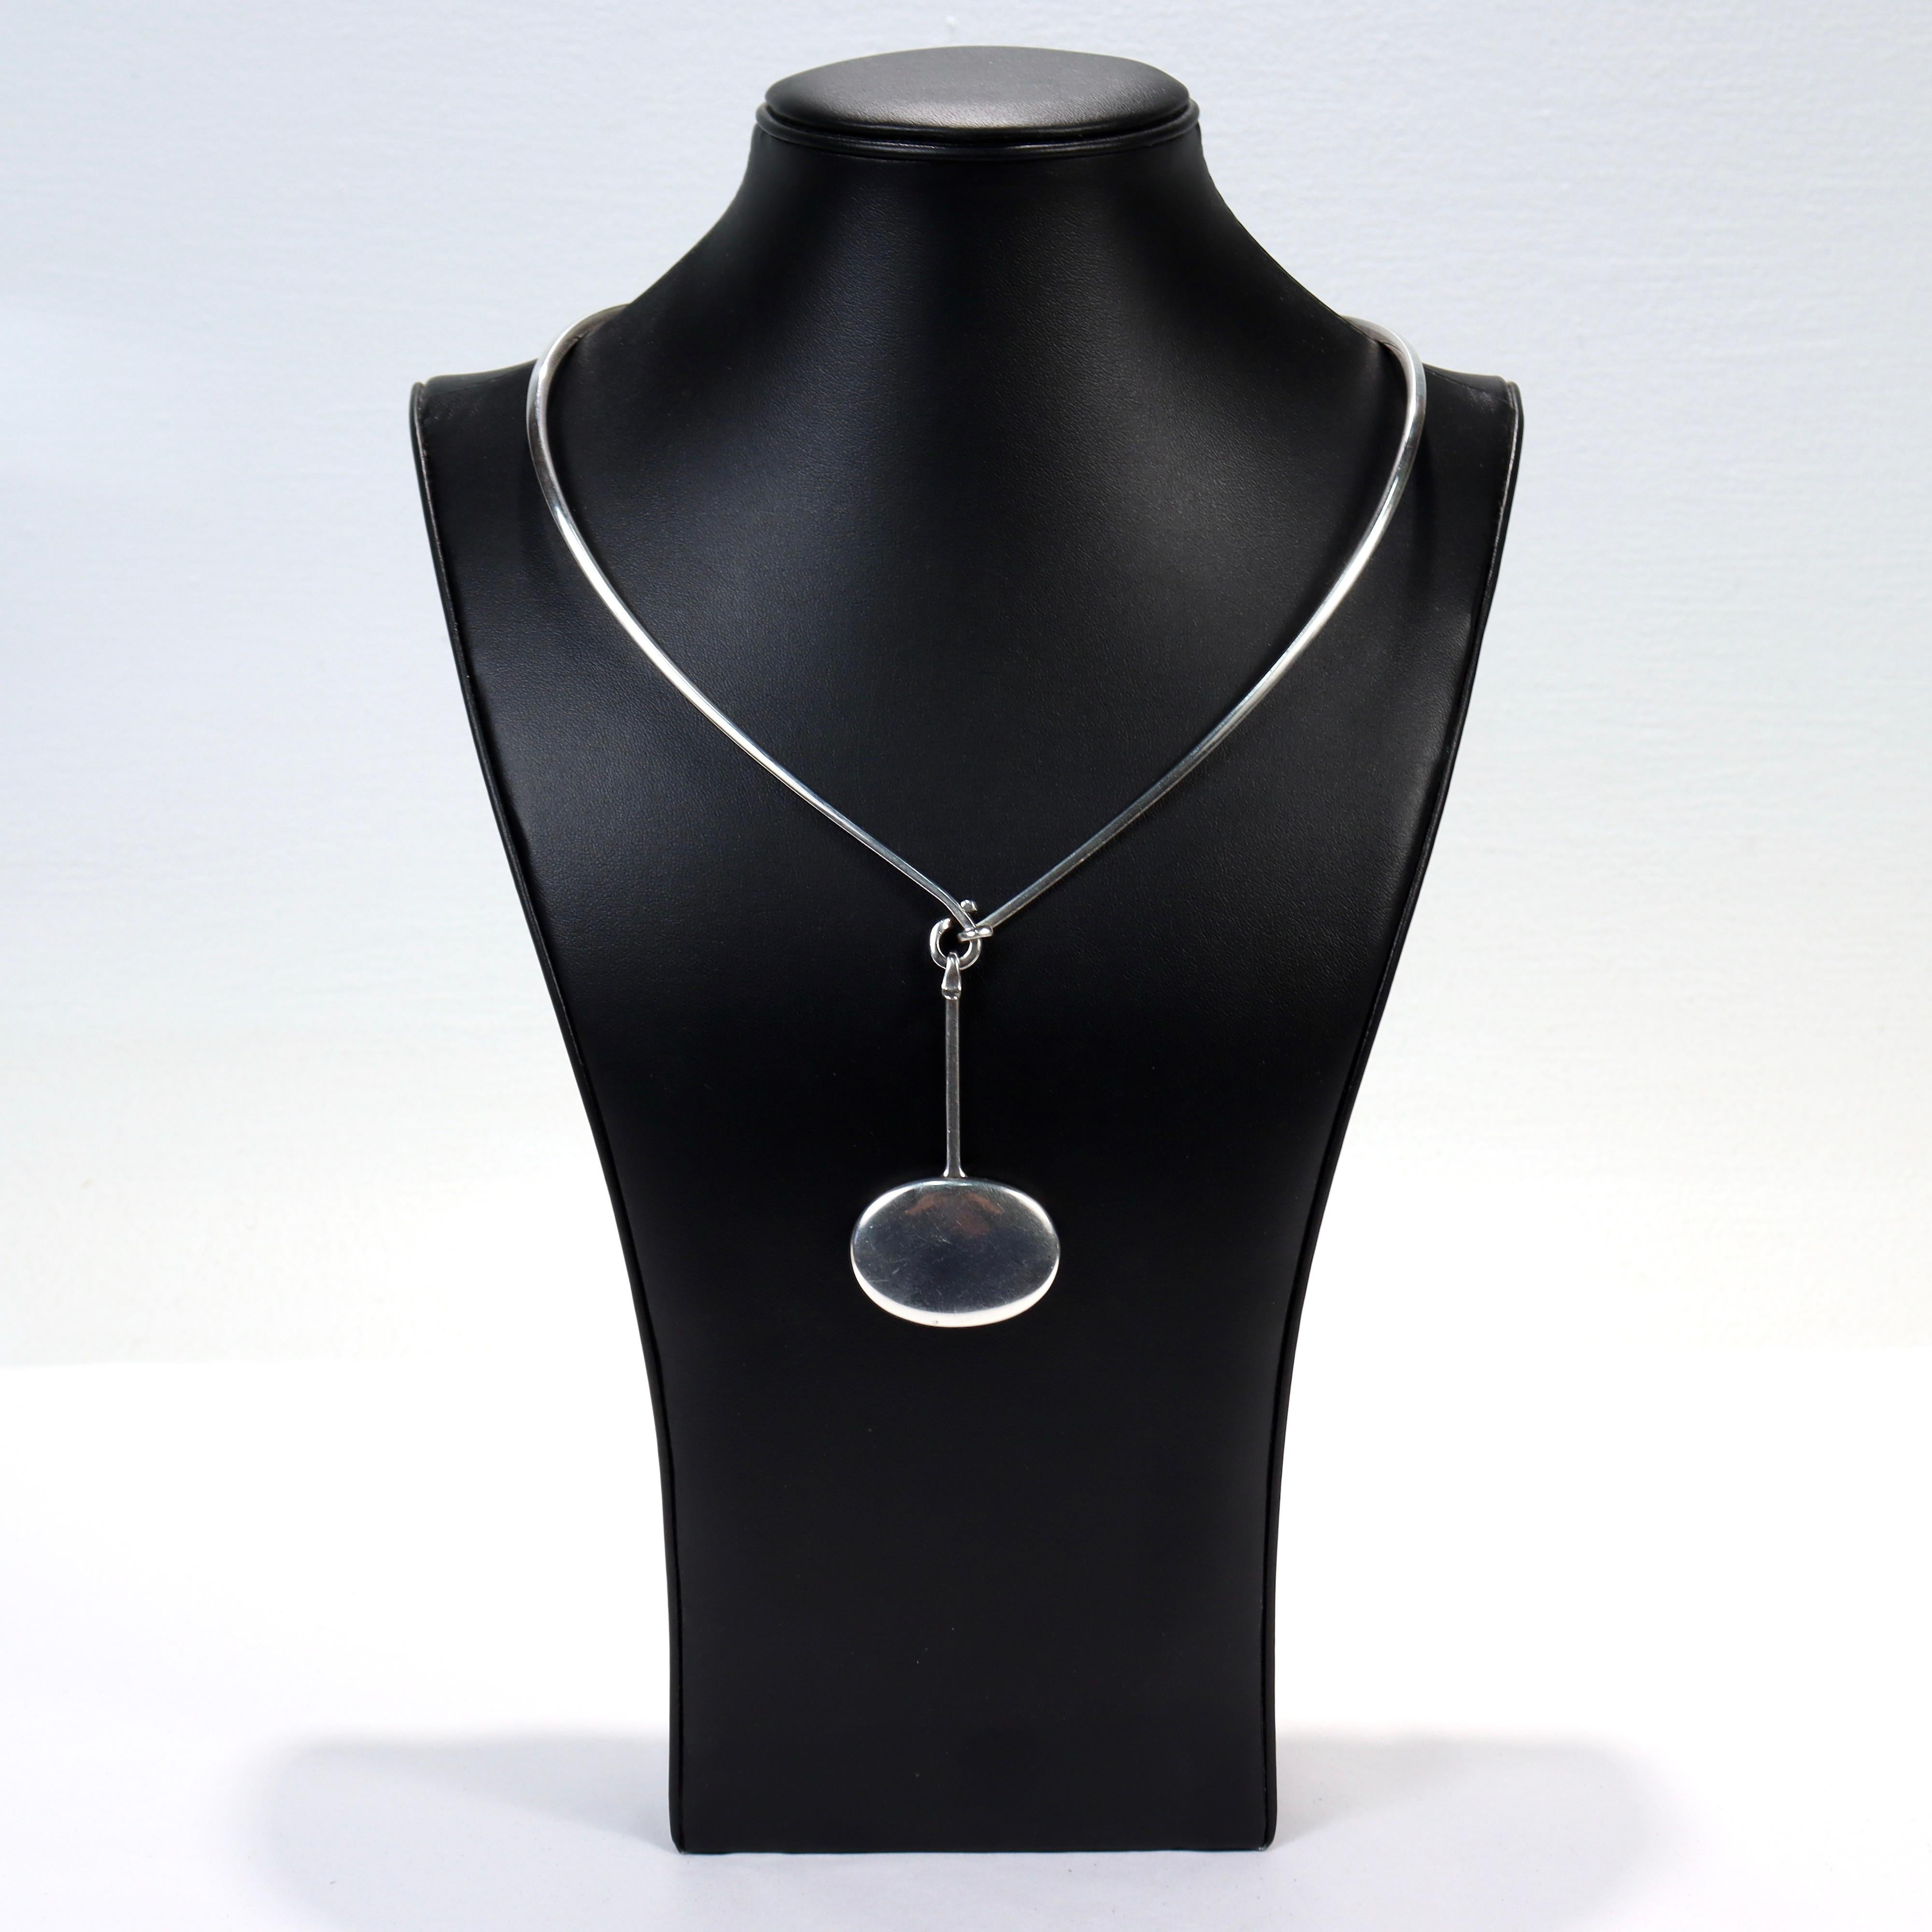 A fine Georg Jensen sterling silver necklace.

Designed by Vivianna Torun Bulow-Hube, who designed under the pseudonym Torun. 

Comprised of the shaped neck piece no. 167 and a silver pendant no. 304.

Together with its original Georg Jensen felt